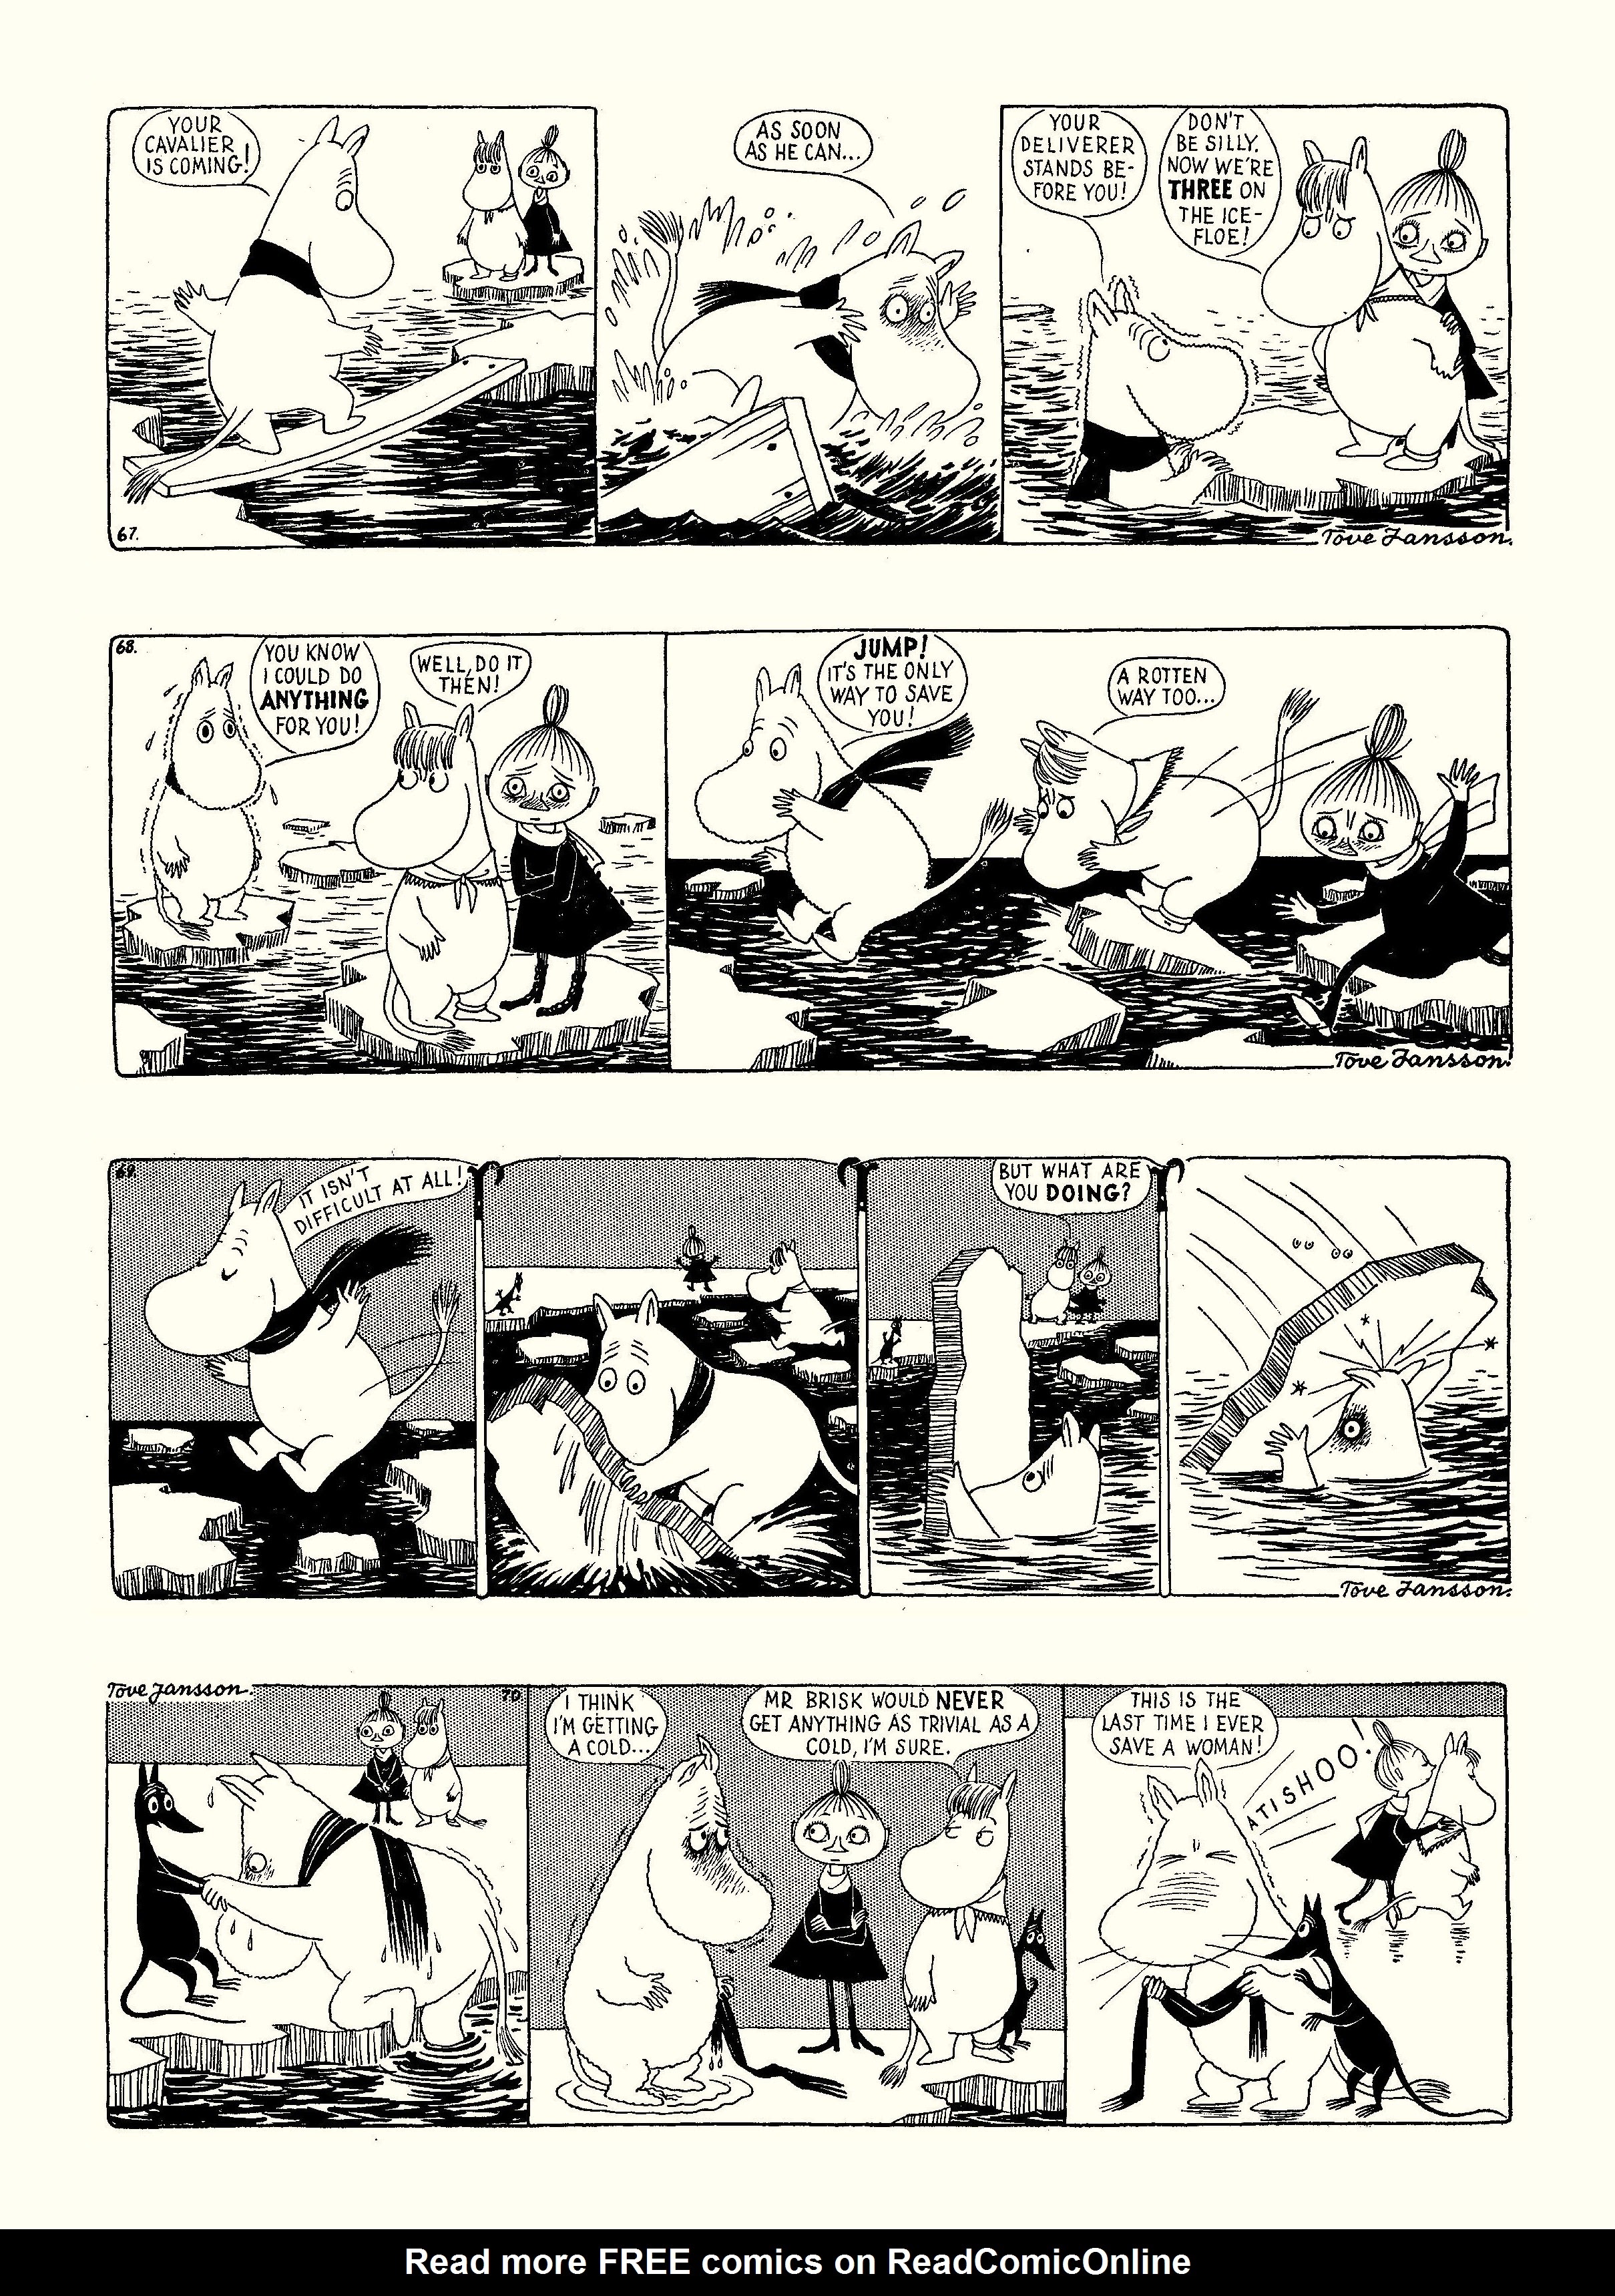 Read online Moomin: The Complete Tove Jansson Comic Strip comic -  Issue # TPB 2 - 23